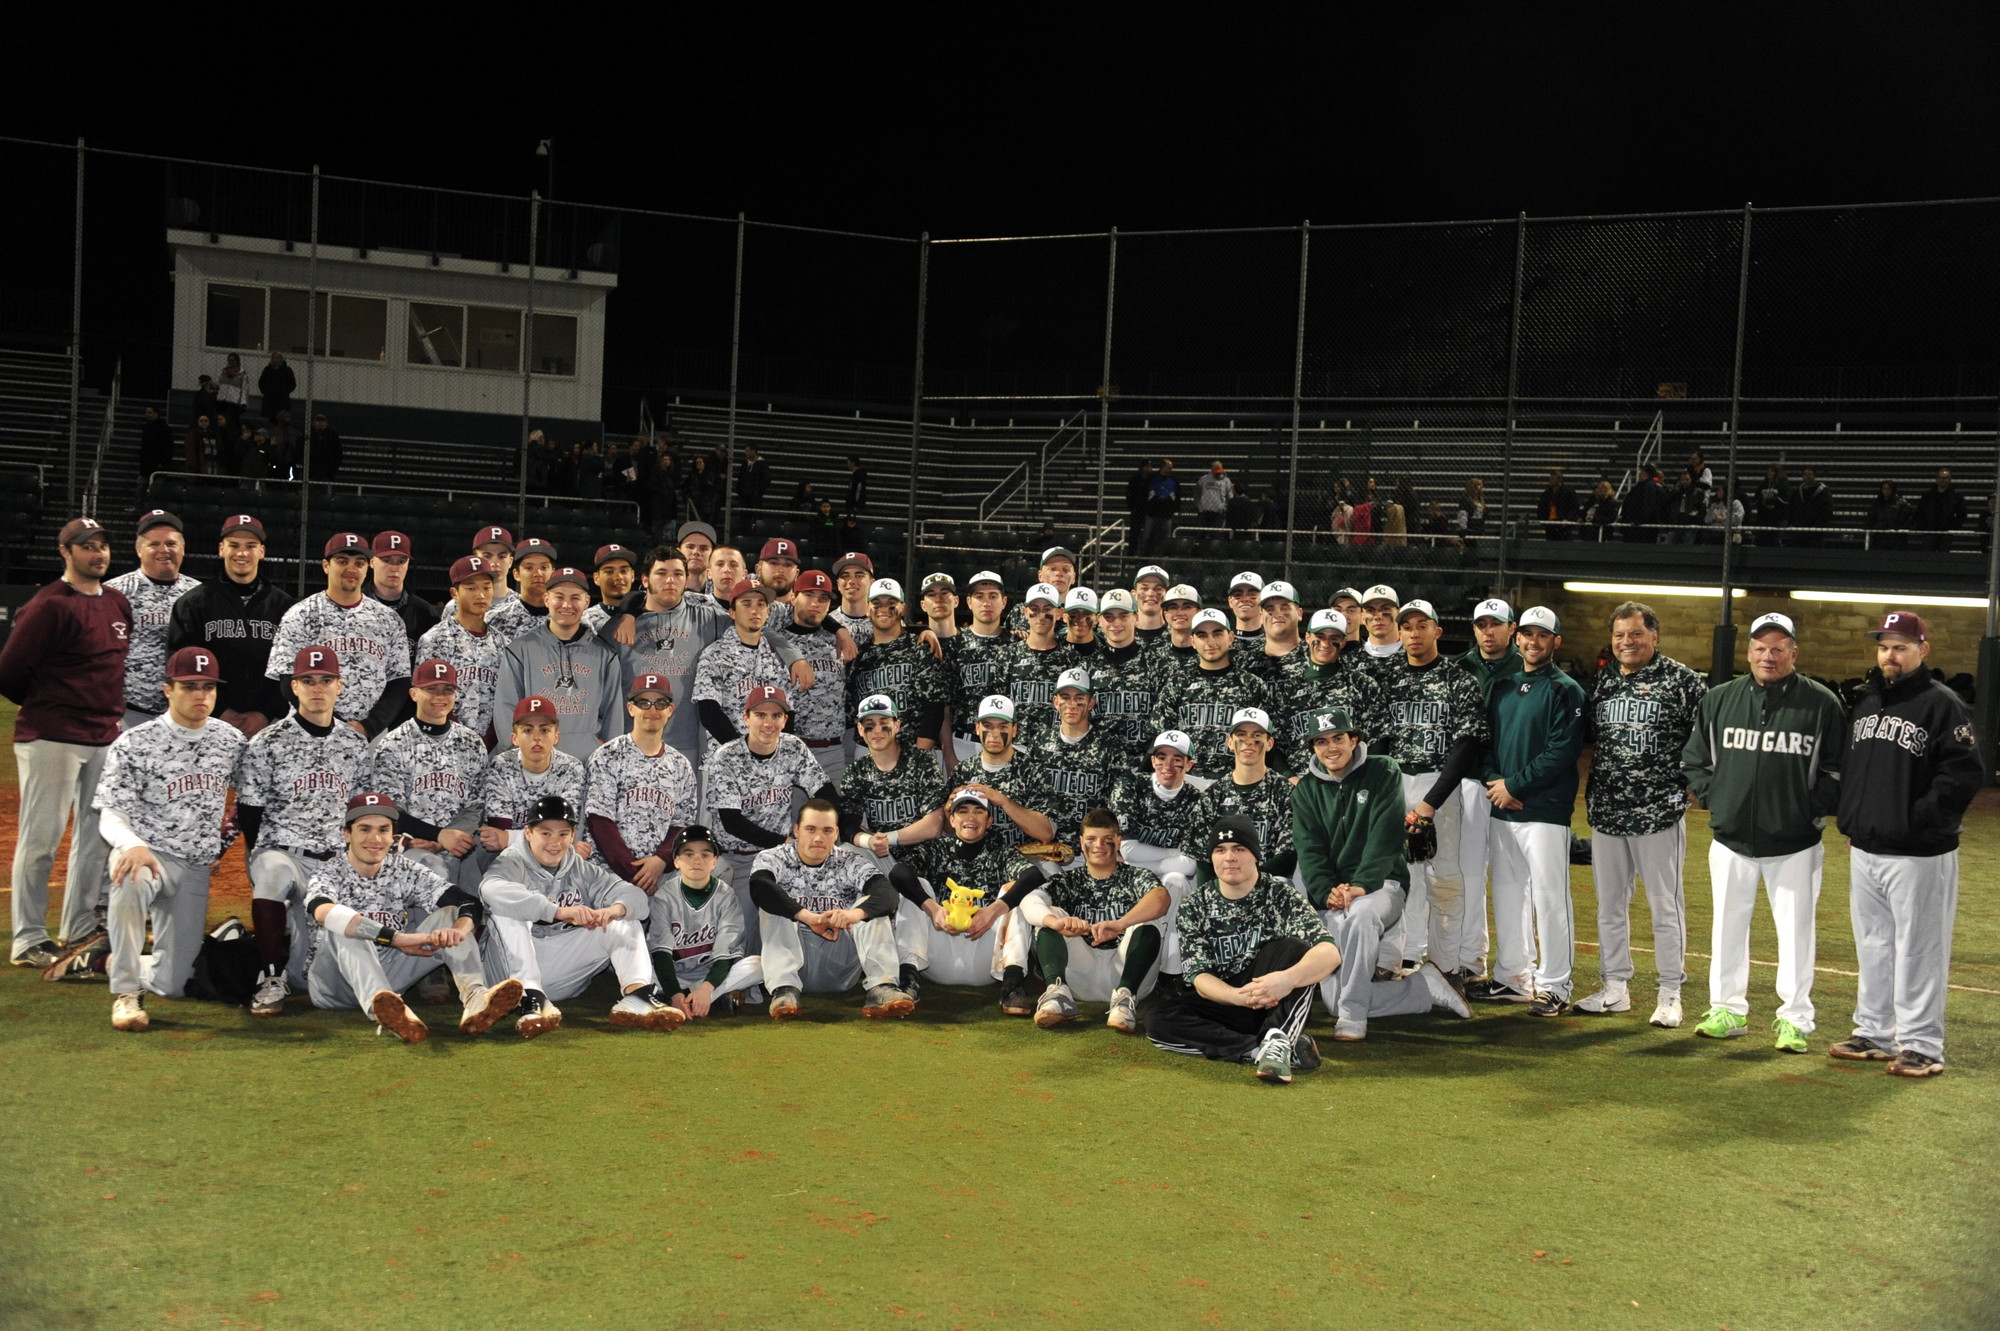 The Mepham and Kennedy baseball teams recently squared off at the SUNY Farmingdale Baseball Complex in a special charity game to honor military personnel and their families.